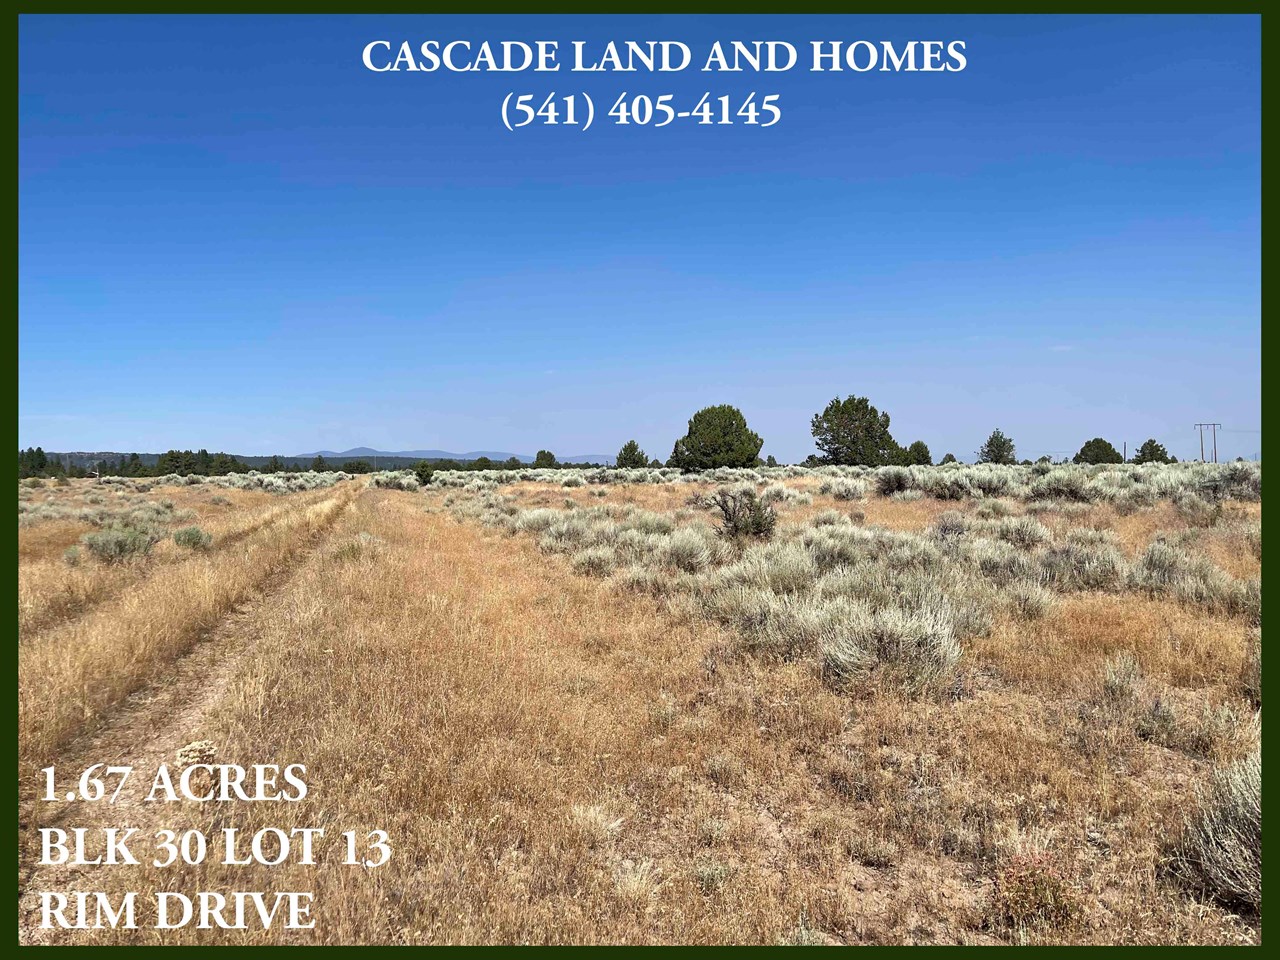 roads to the subdivision are paved, and they are packed with gravel and dirt within the subdivision.  it is very rural here. the property is not far from the entrance to the subdivision for easy access, although they are in a more secluded, less traveled part of the subdivision.